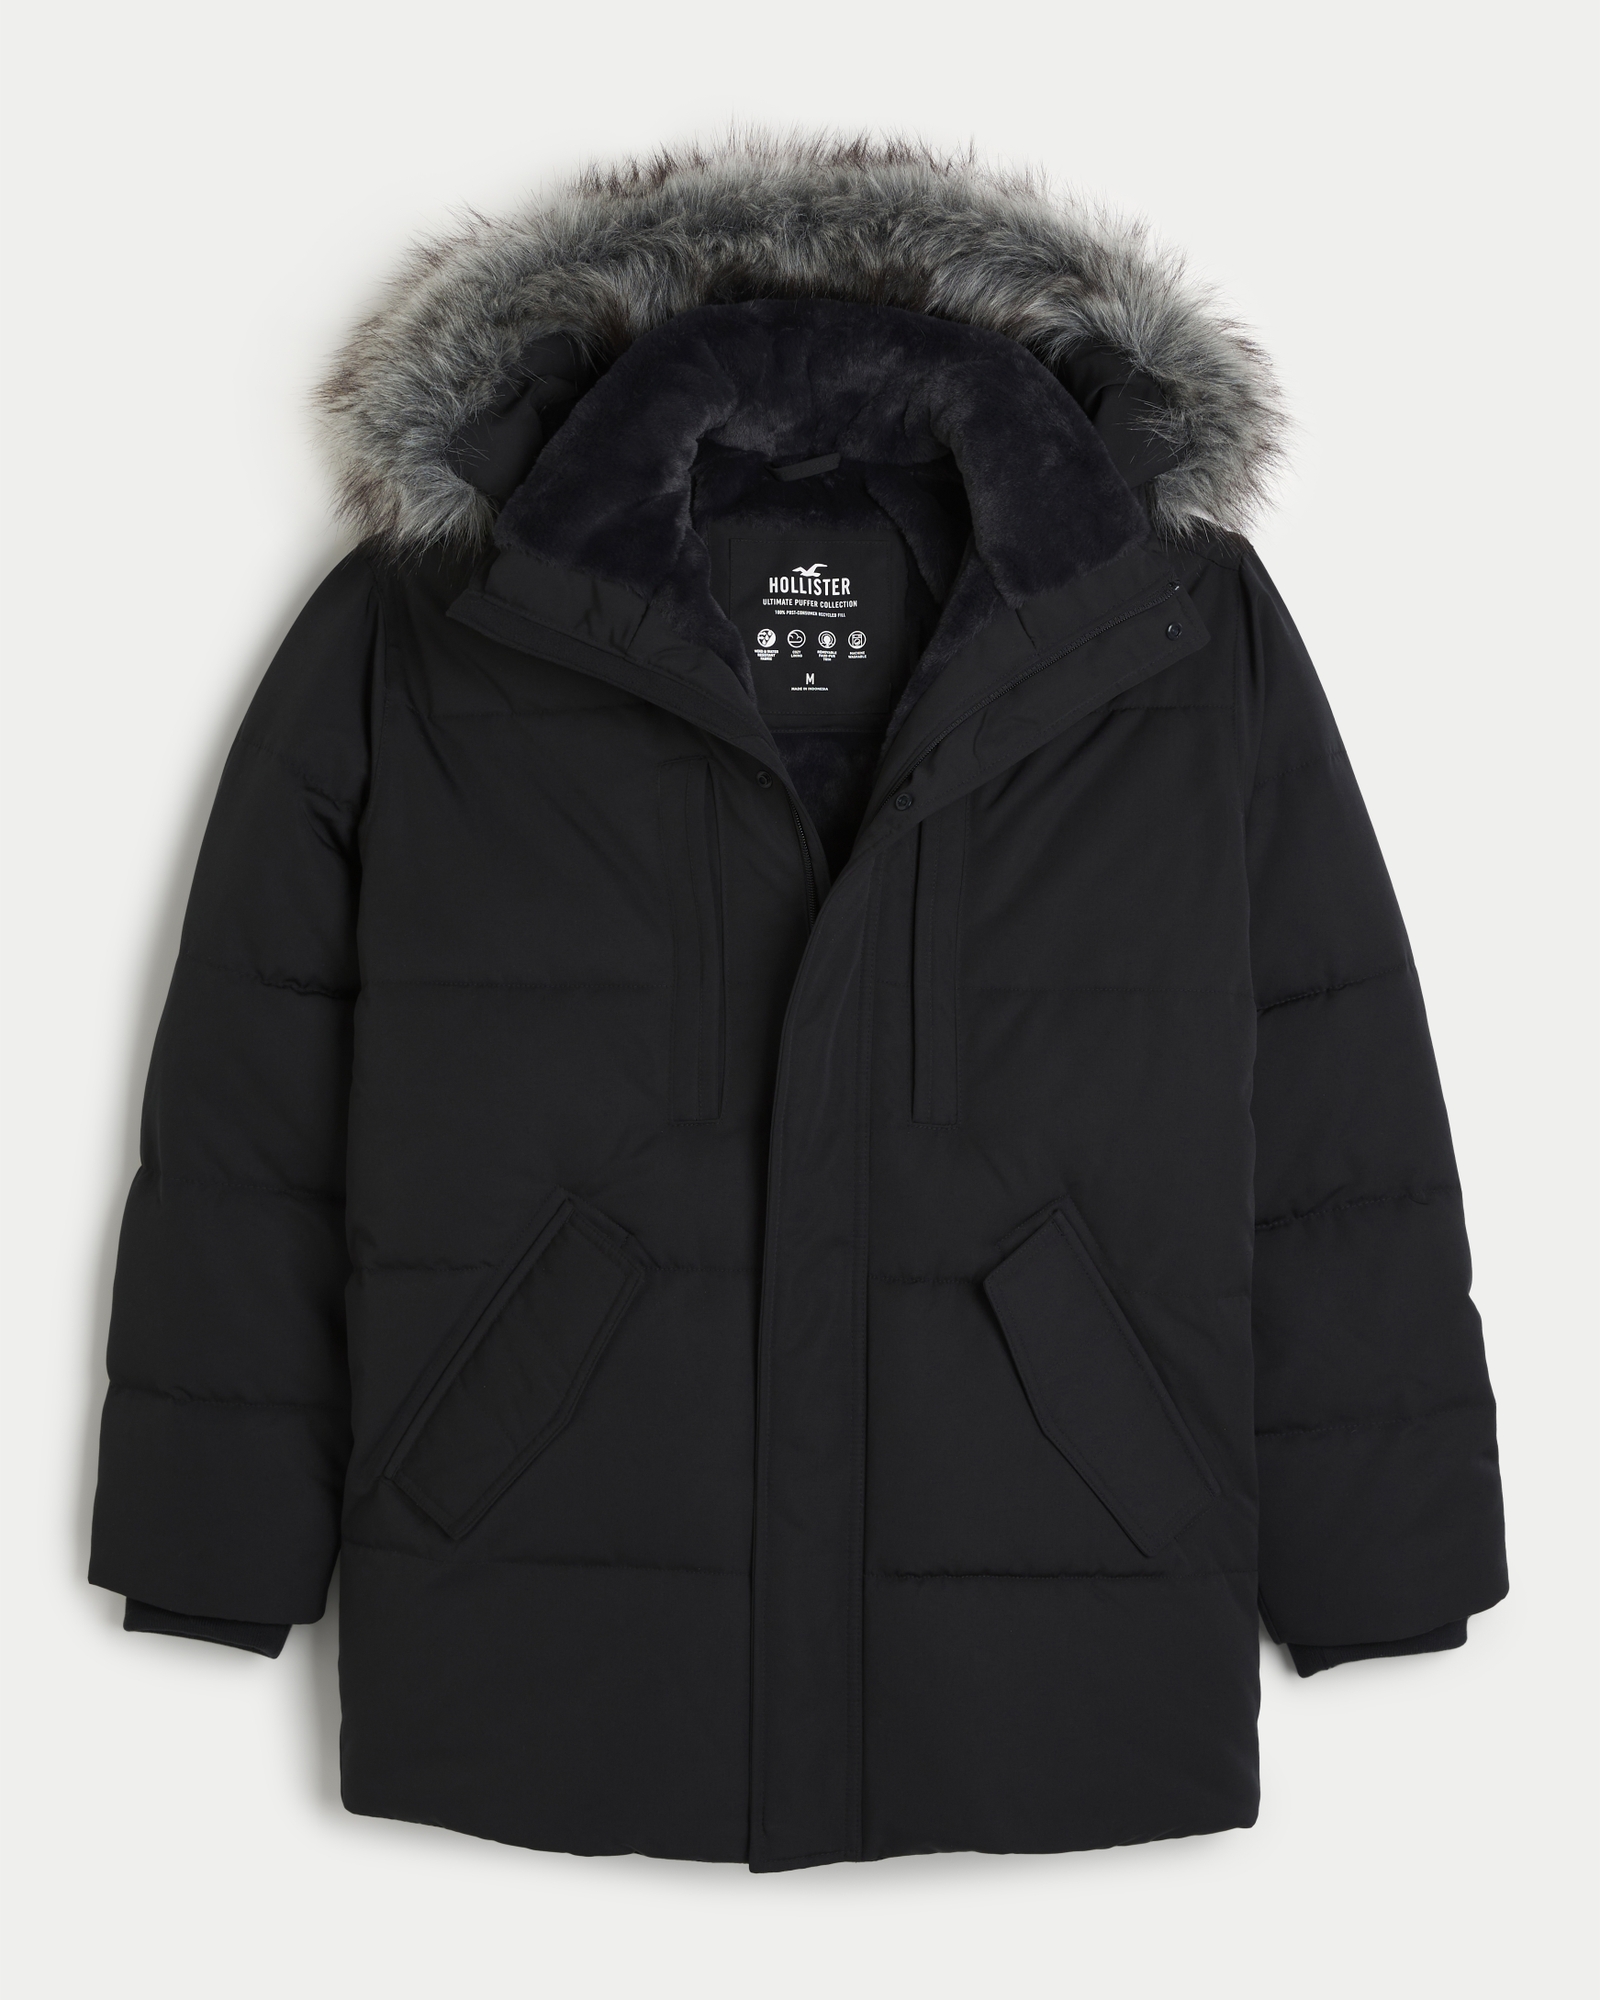 Hollister Co.  hollister's ultimate puffer collection coming in